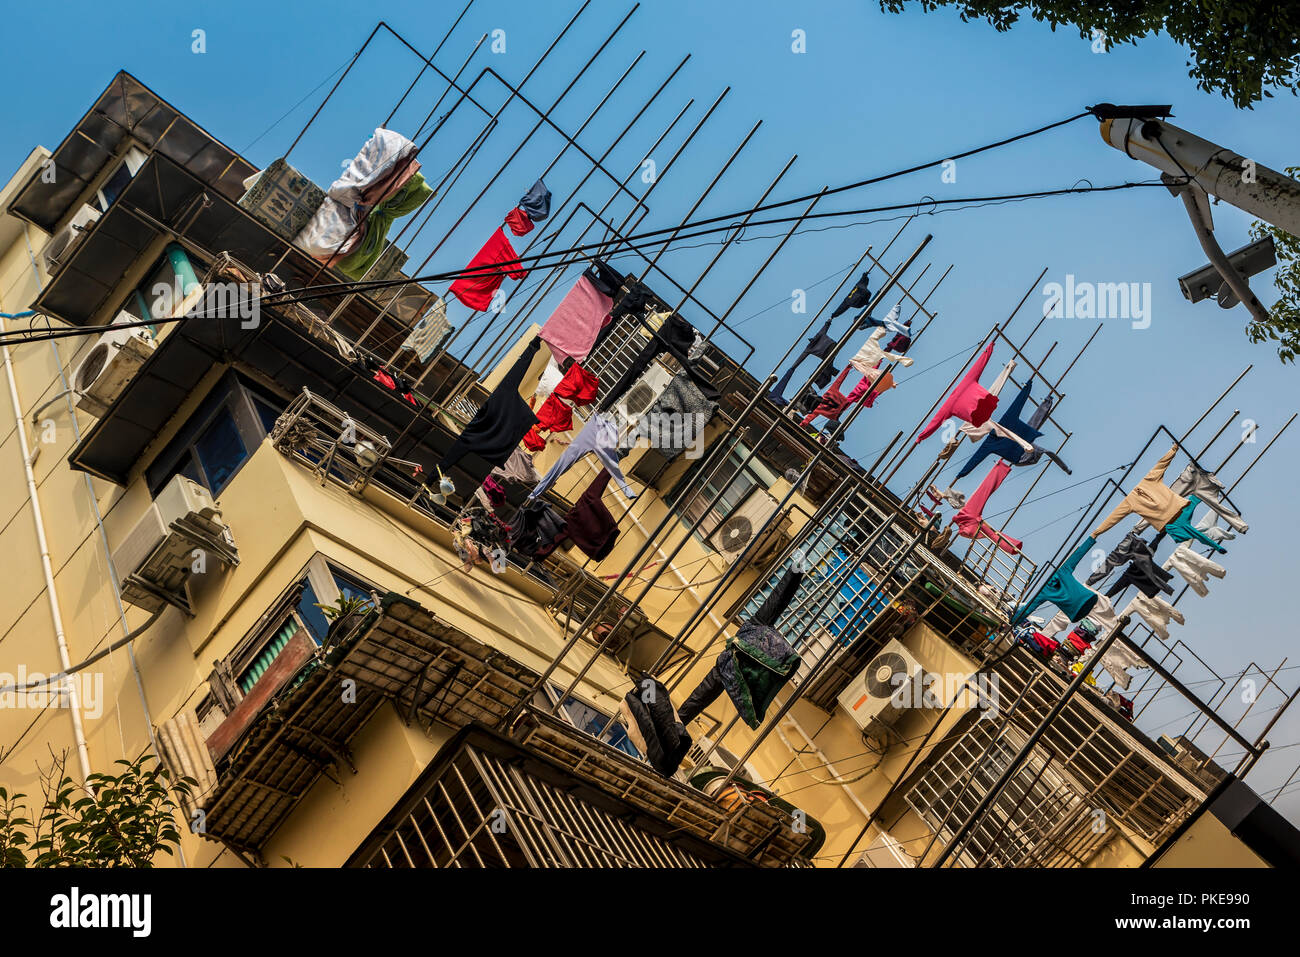 Low angle view of clothing hanging to dry outside an apartment building, Qibao Old Town, Minhang District; Shanghai, China Stock Photo